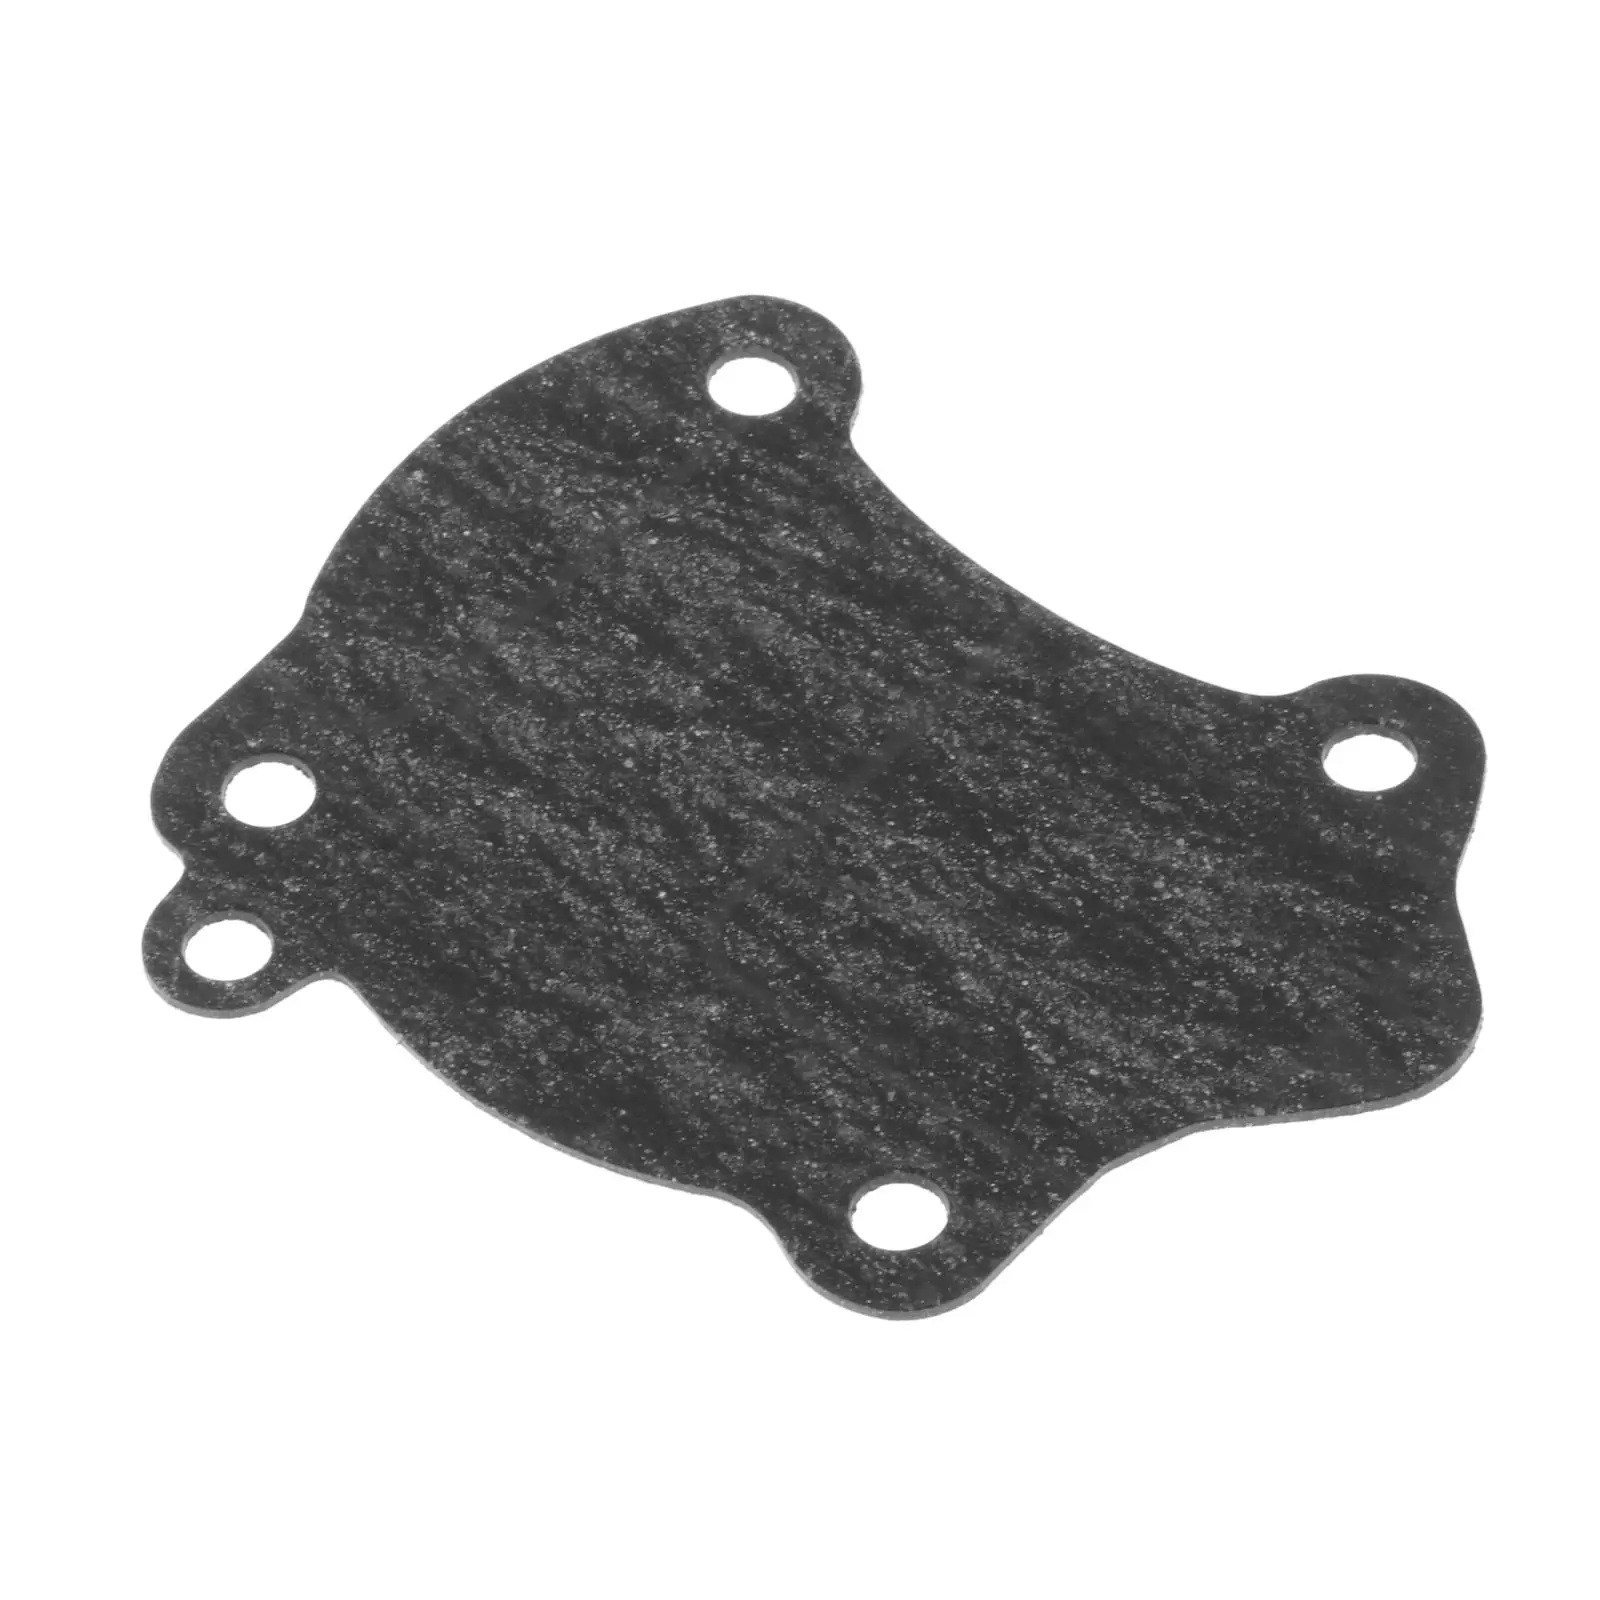 1Pcs Head Cover Gasket Repair Parts Compatible with Yamaha Outboard 4 hp 2 stroke 6E0-11193-A1